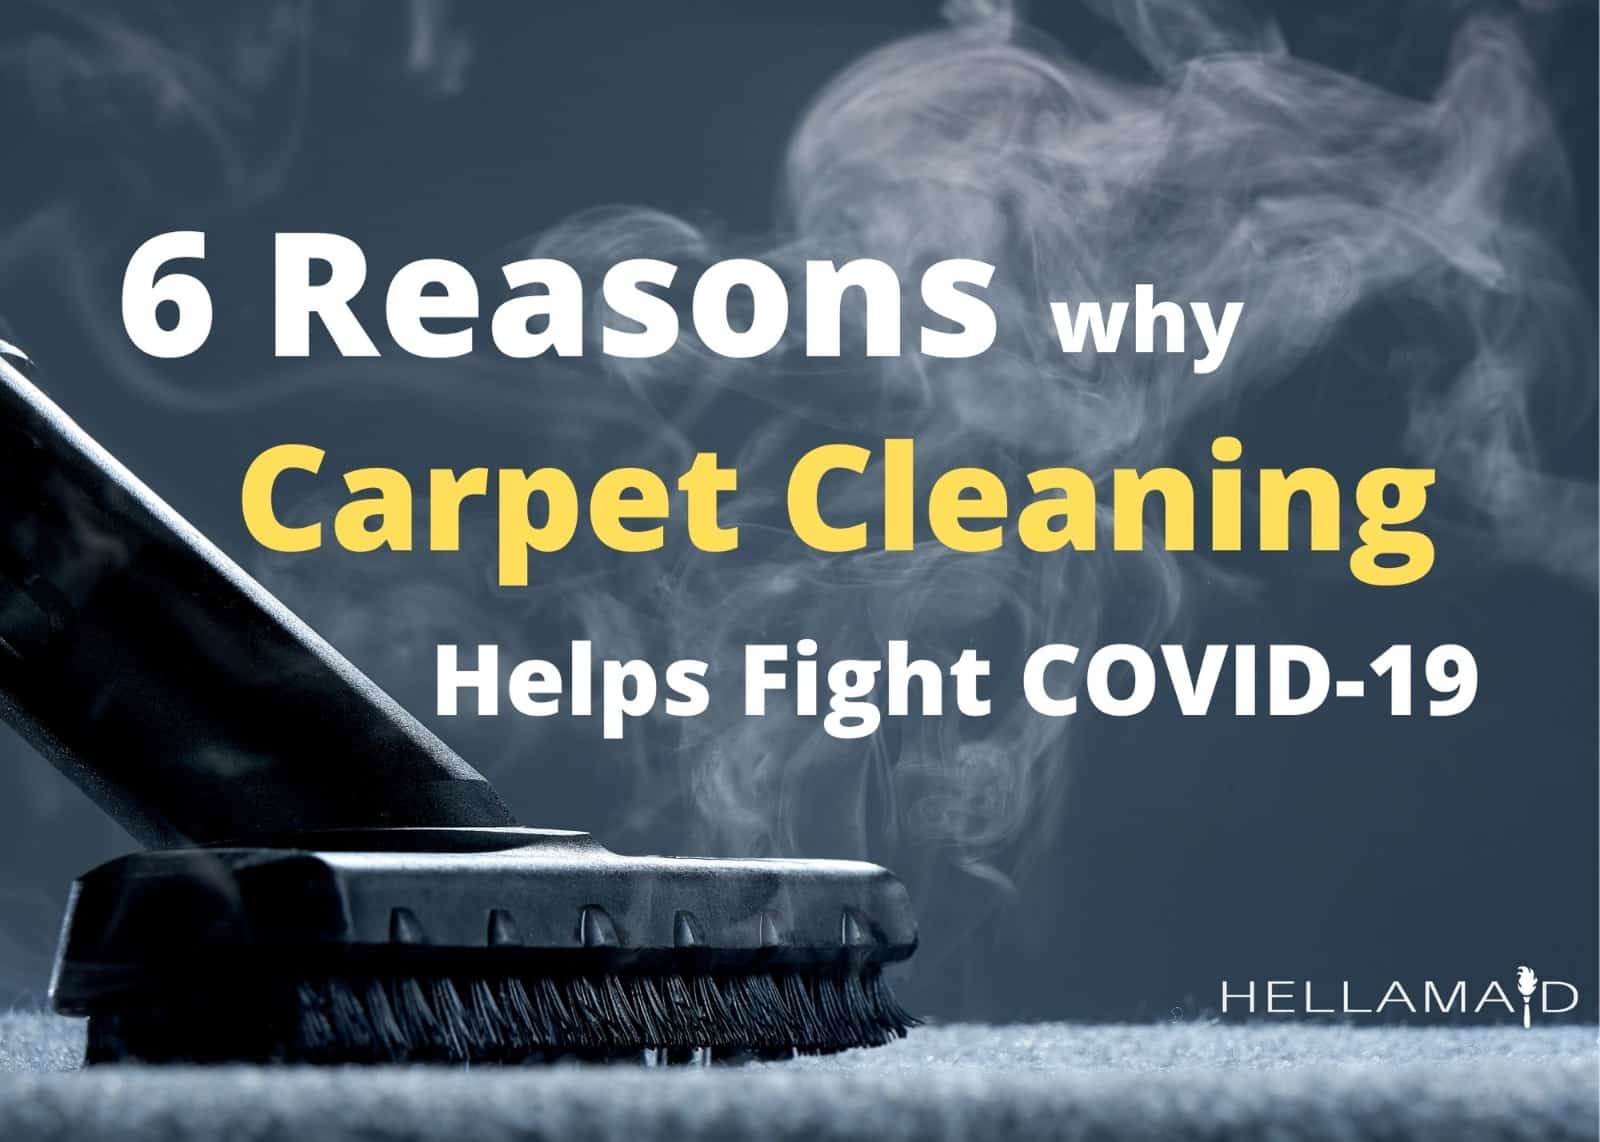 carpet cleaning helps fight COVID19